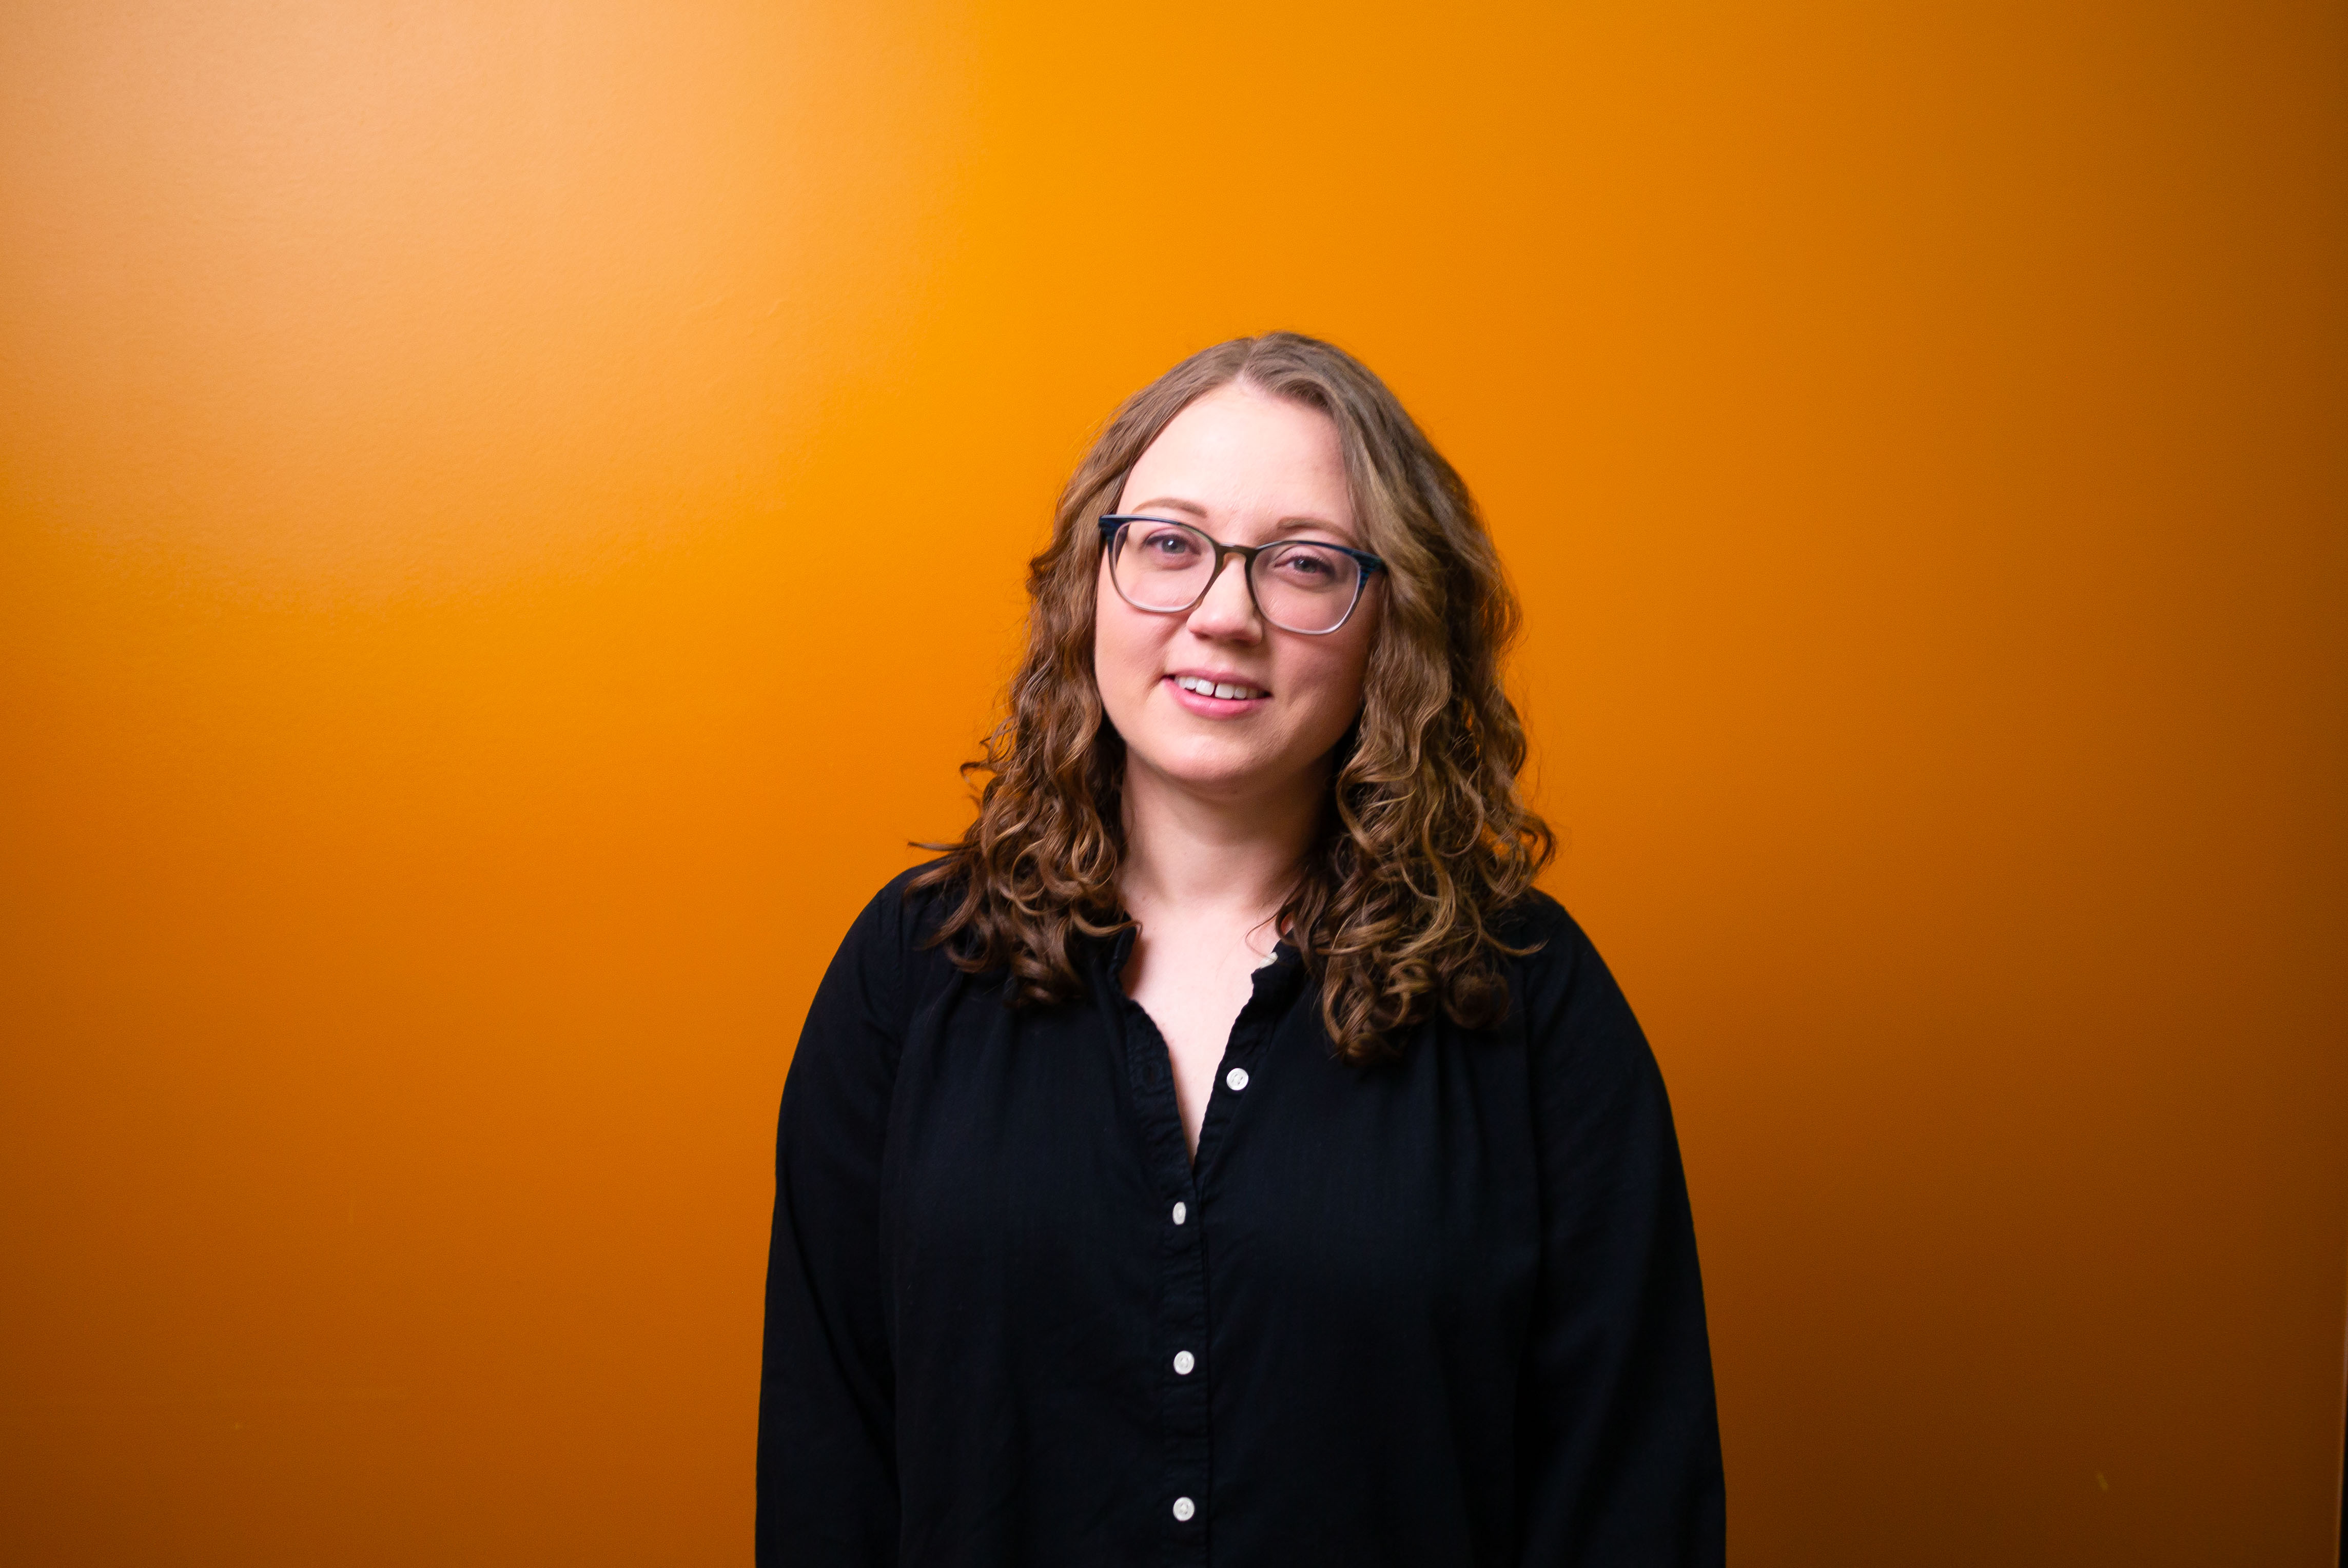 Katie Harding with long brown curly hair wearing glasses and a black button-up blouse stands smiling indoors in front of an orange wall. 